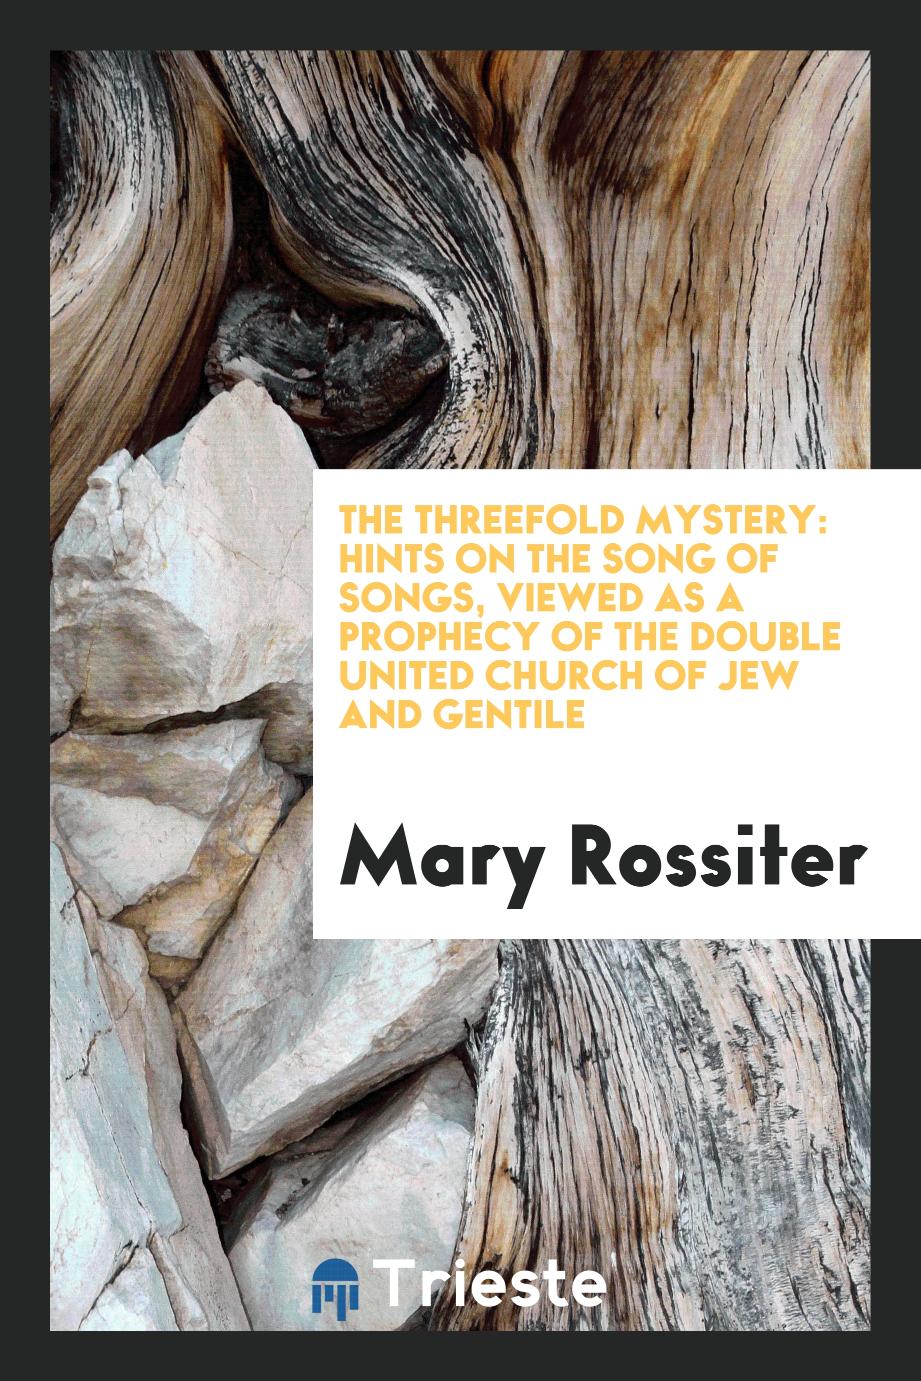 The Threefold Mystery: Hints on the Song of Songs, Viewed as a Prophecy of the Double United Church of Jew and Gentile